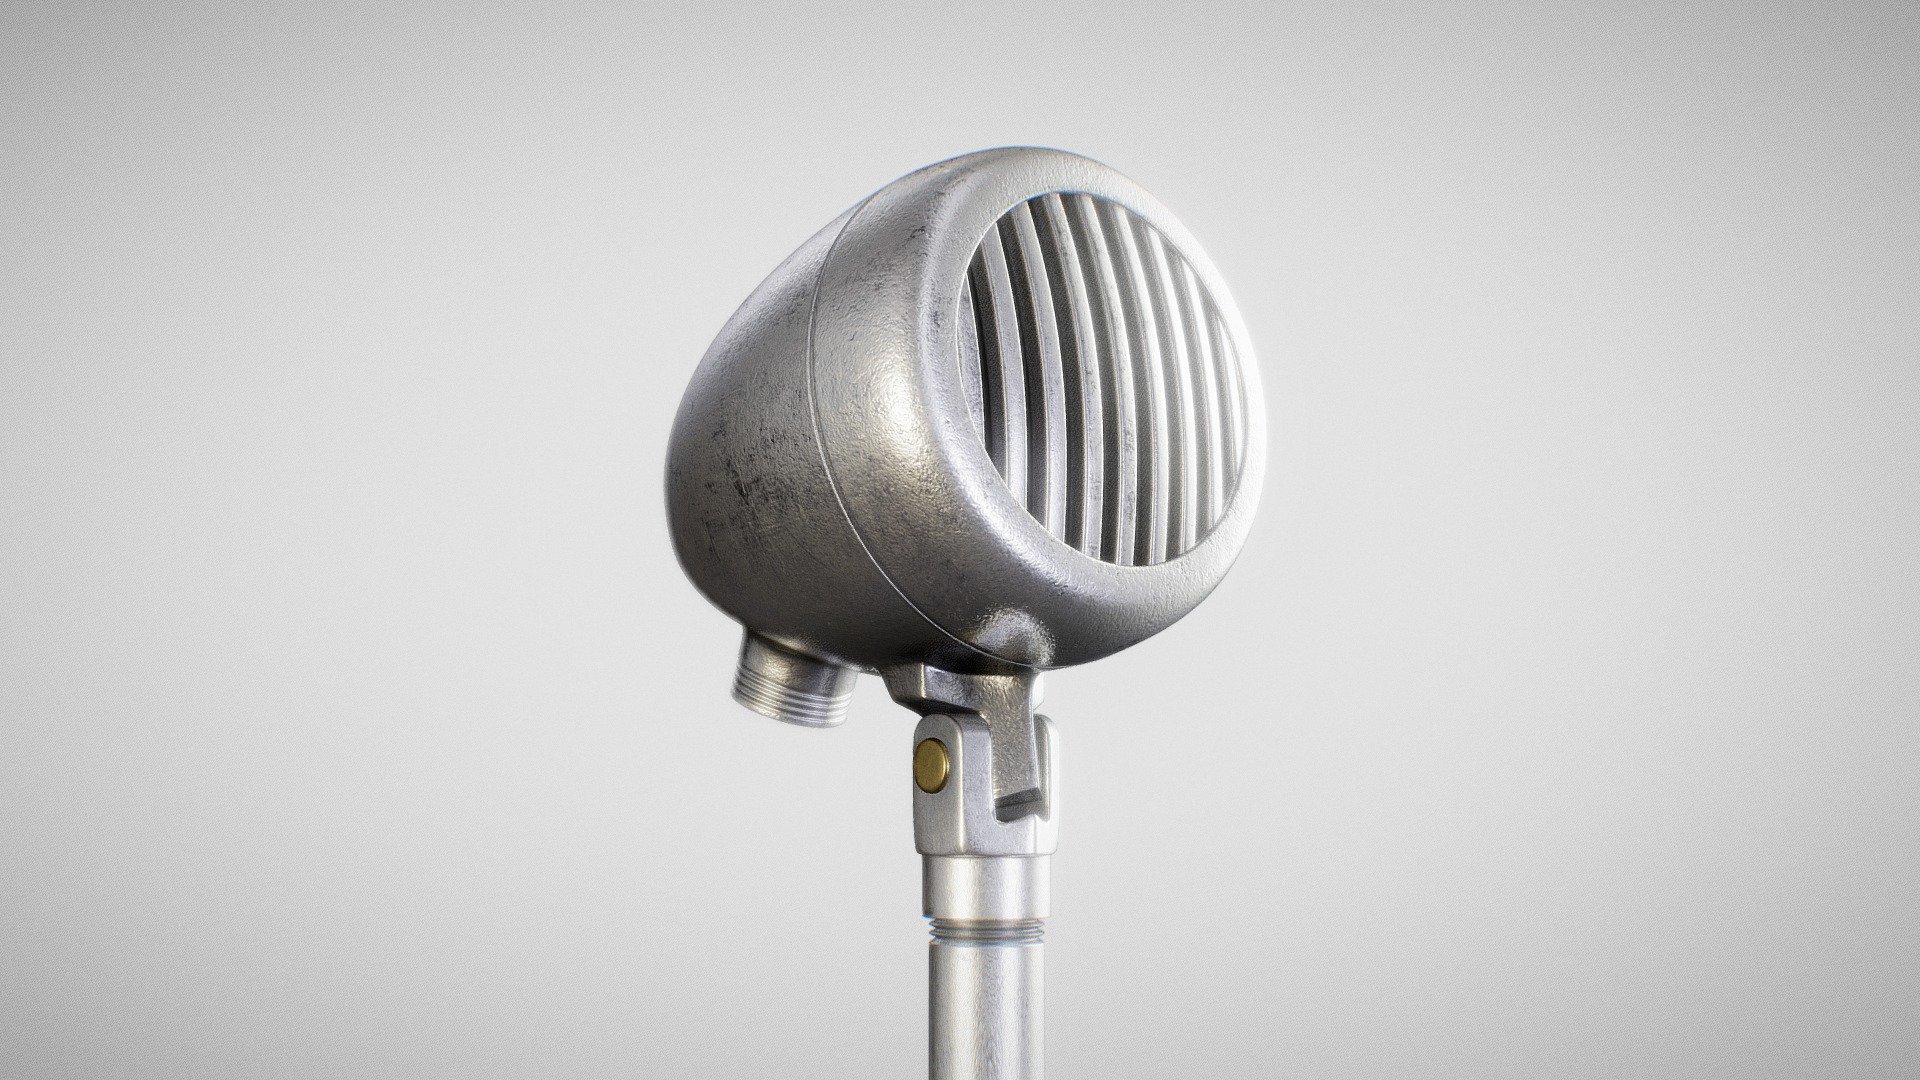 3D model of an American D5T microphone created using reference photos.

Modeled in Blender.

Textures (Non-PBR) created using GIMP 3d model